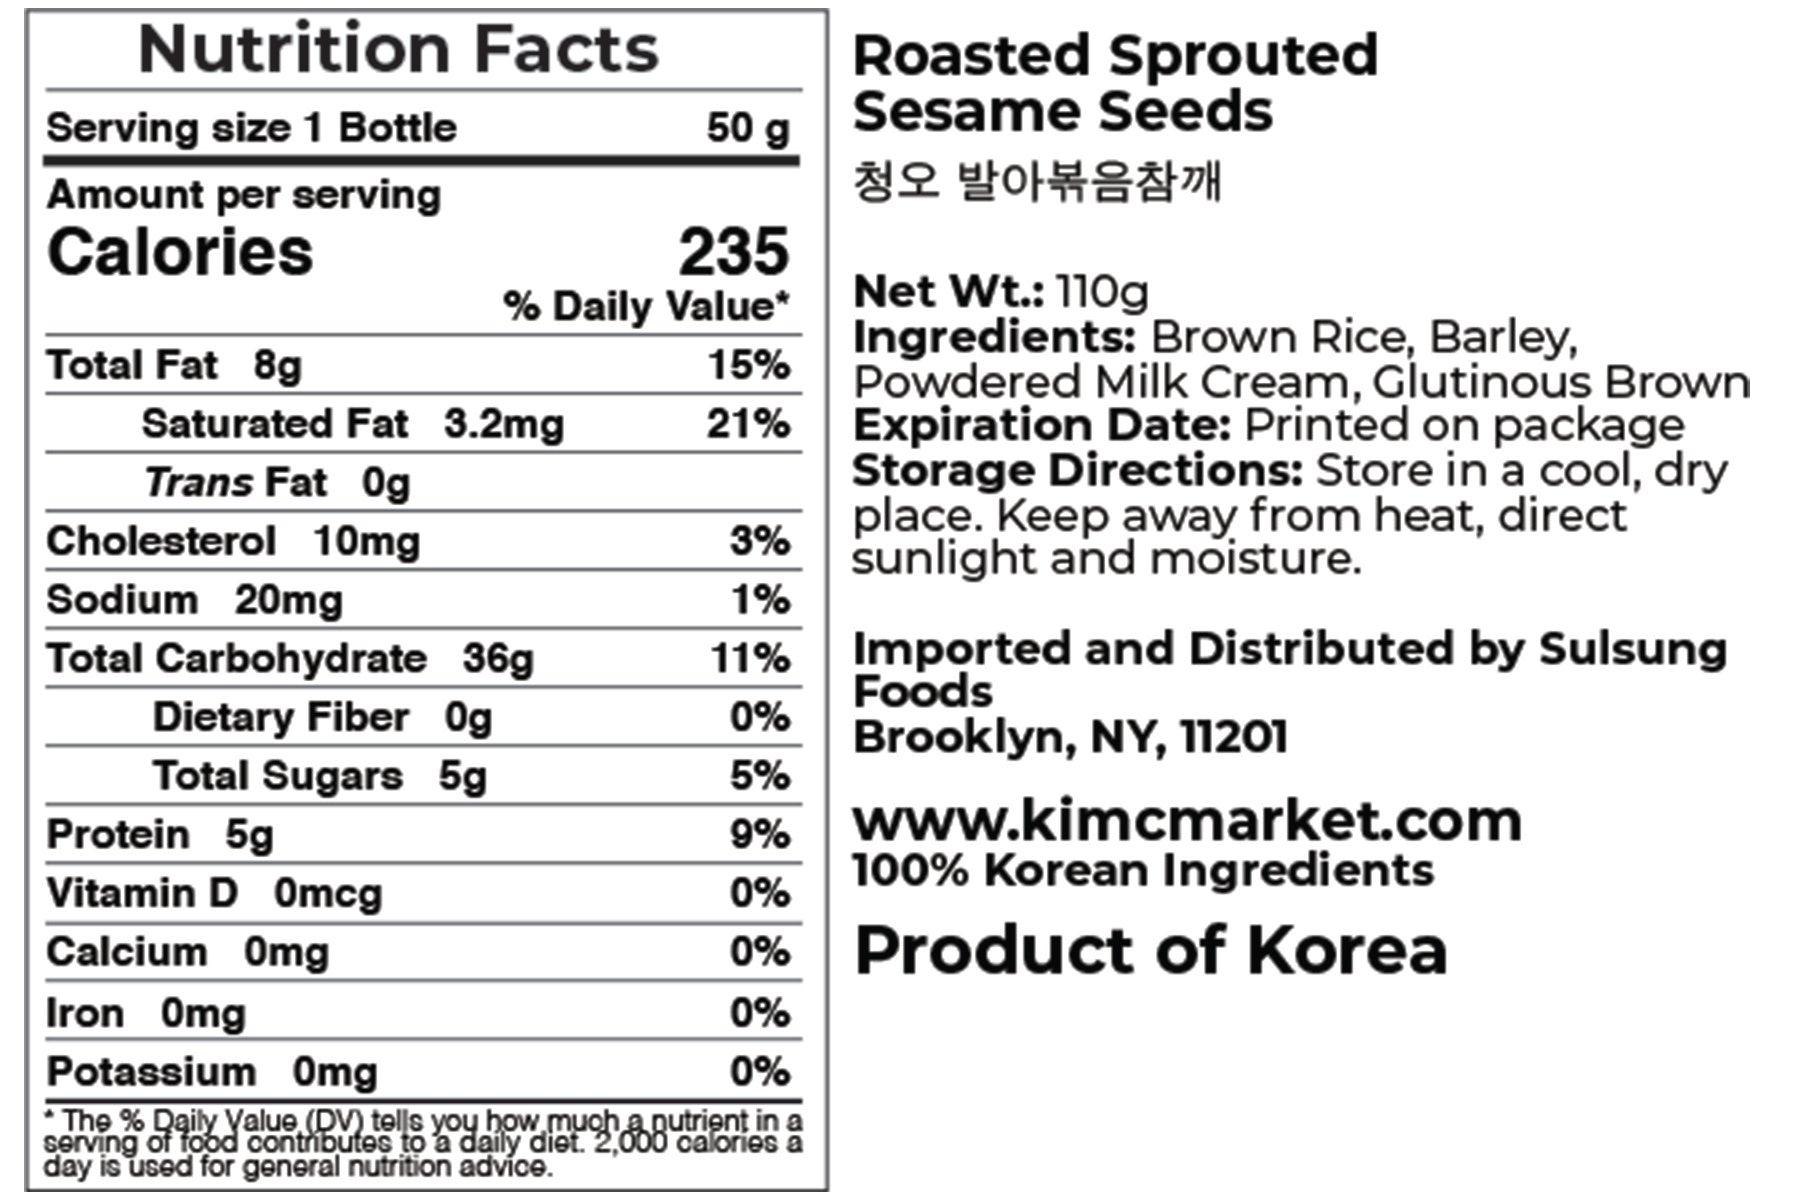 Roasted Sprouted Sesame Seeds - Kim'C Market